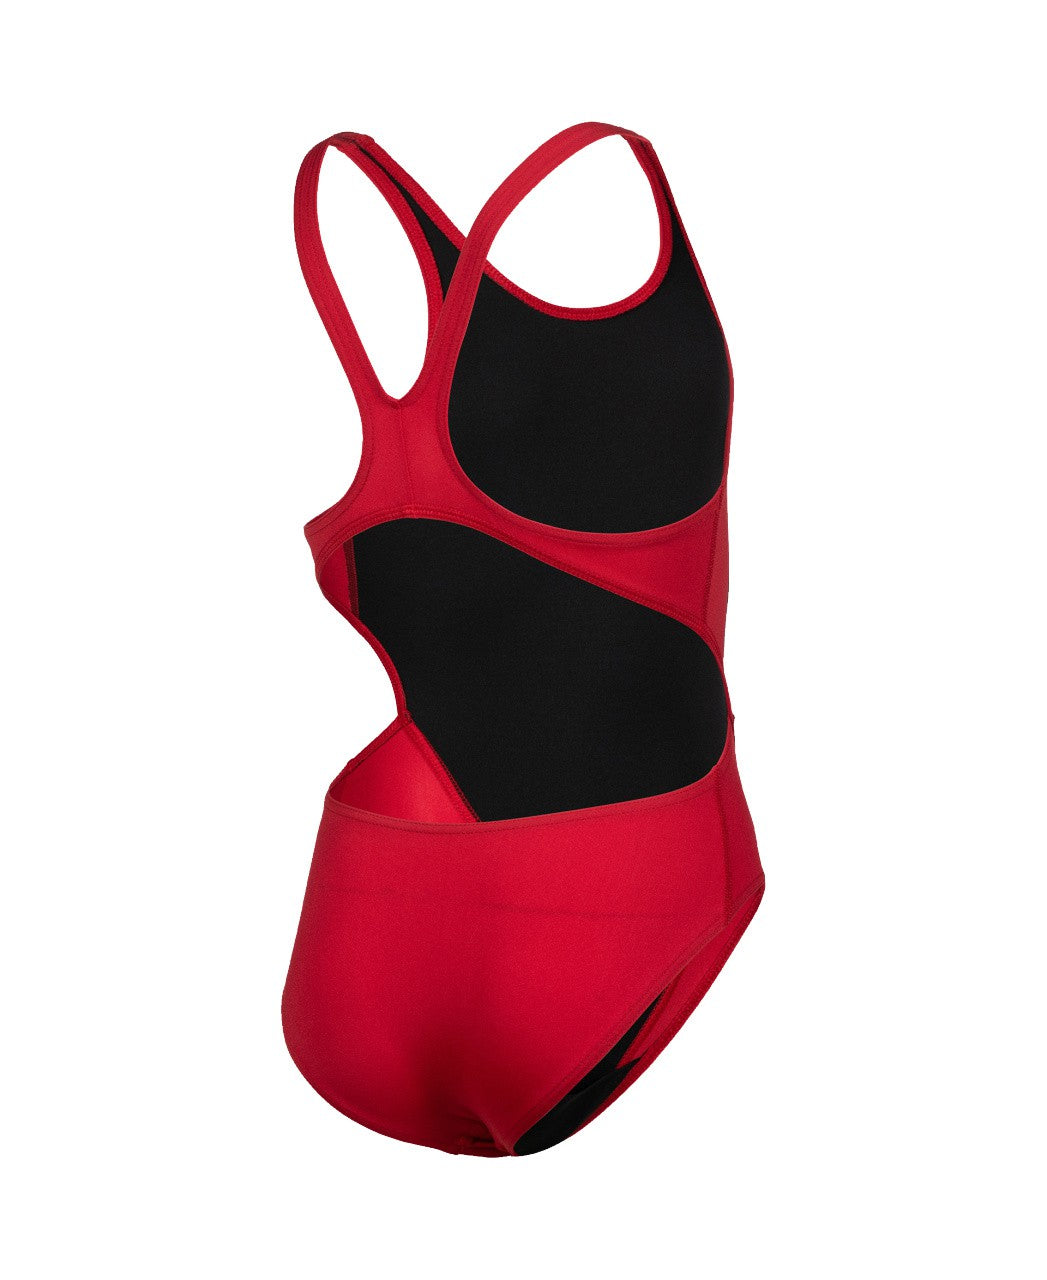 G Team Swimsuit Swim Tech Solid red-white